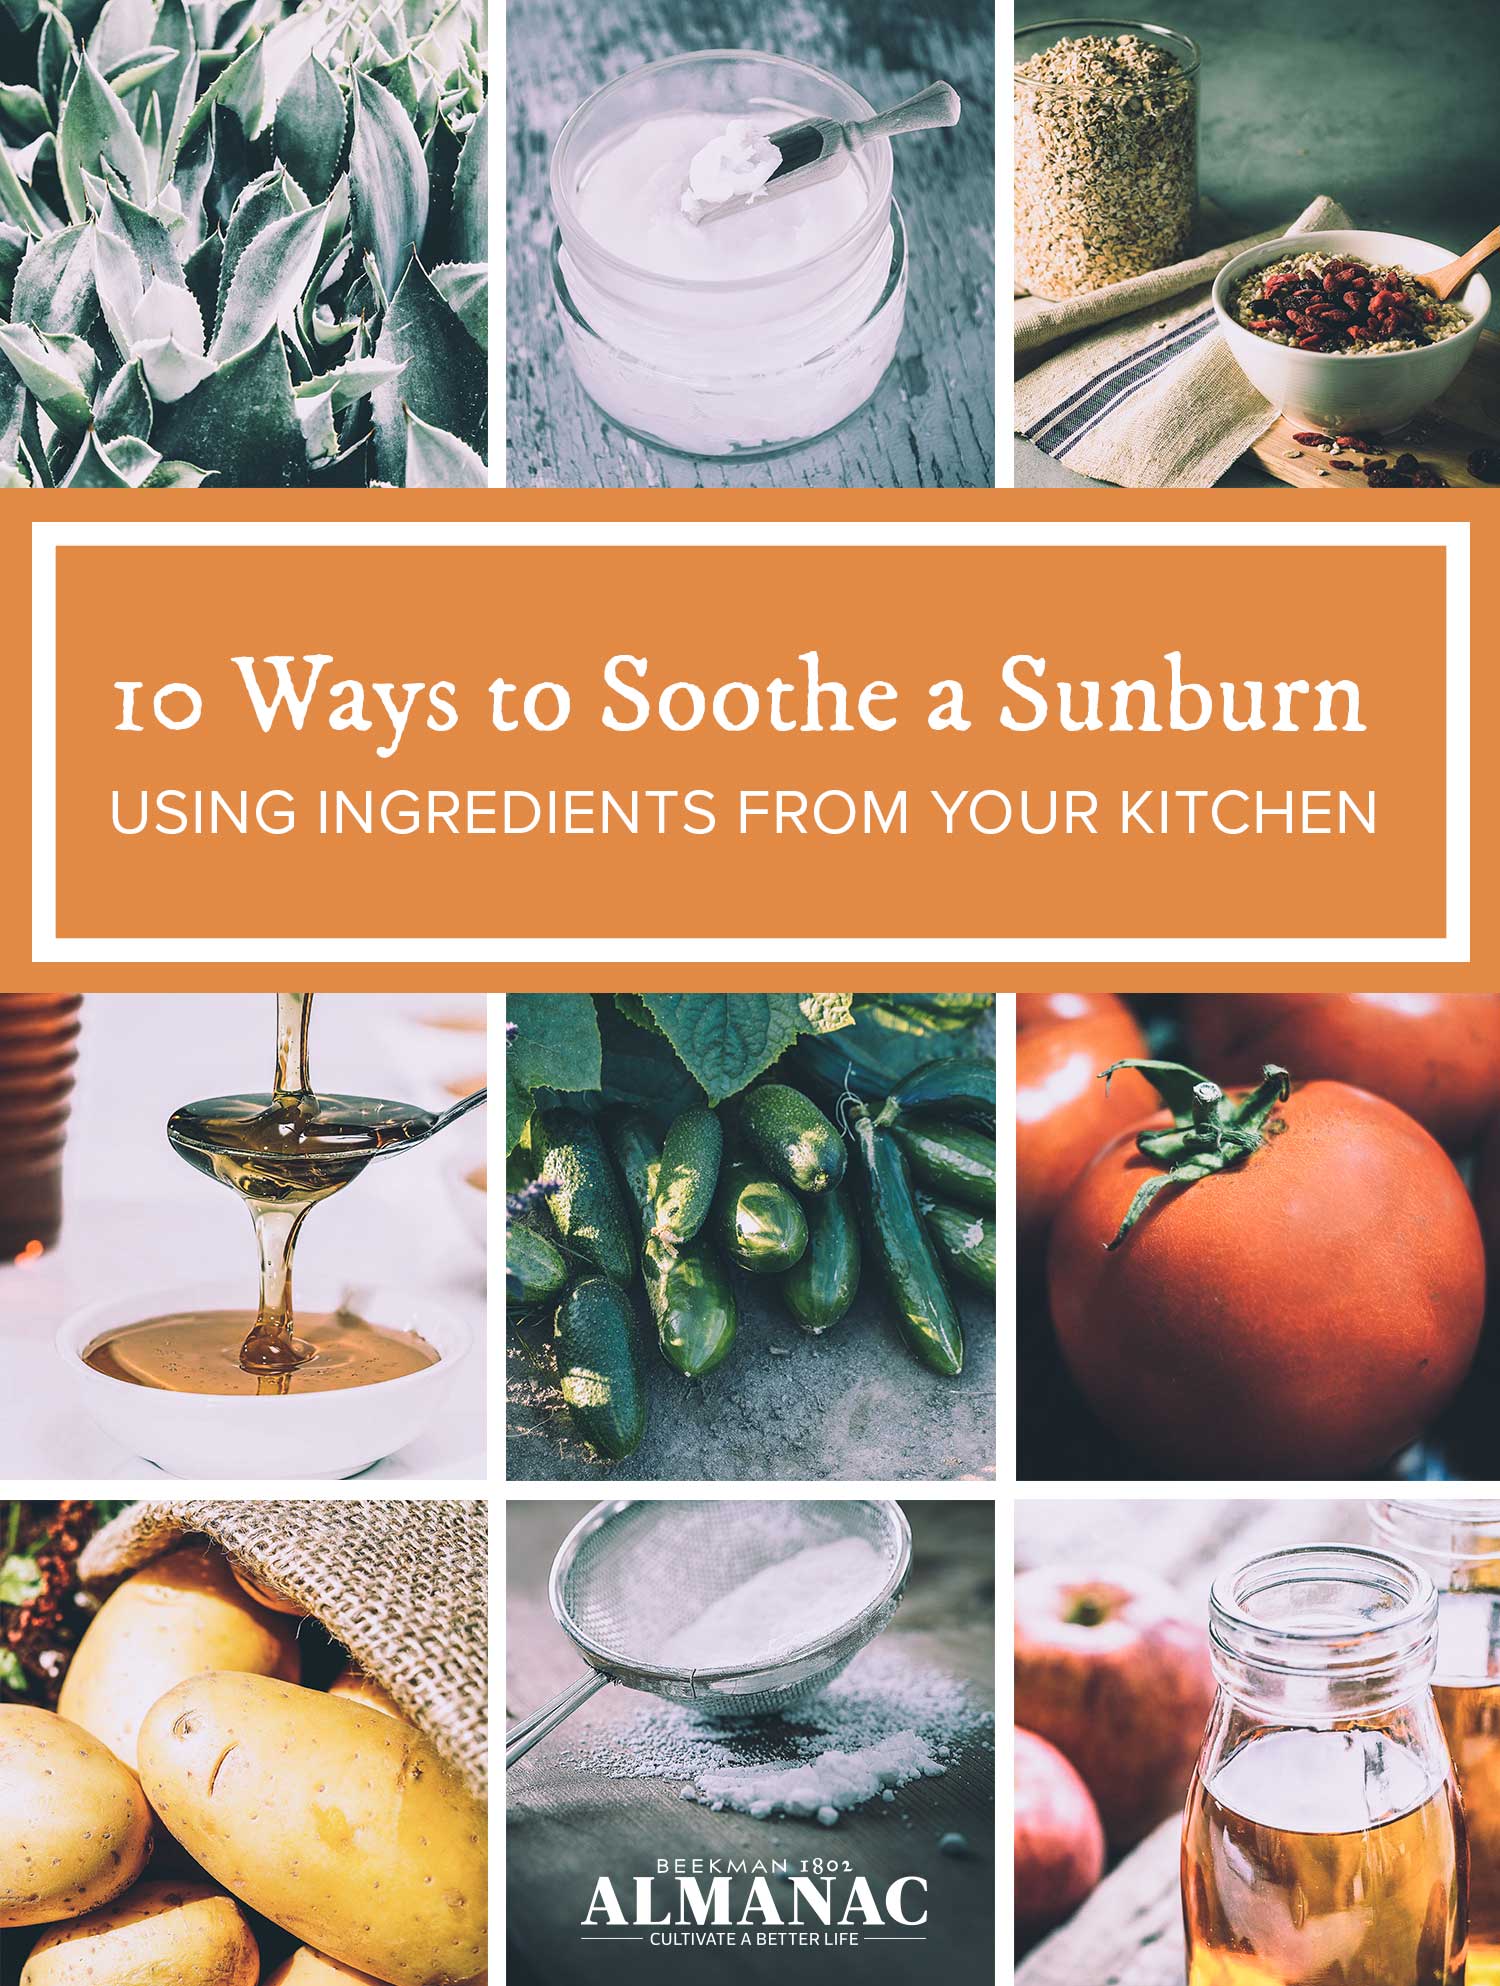 Beekman 1802 - How to Soothe a Sunburn Using Kitchen Ingredients